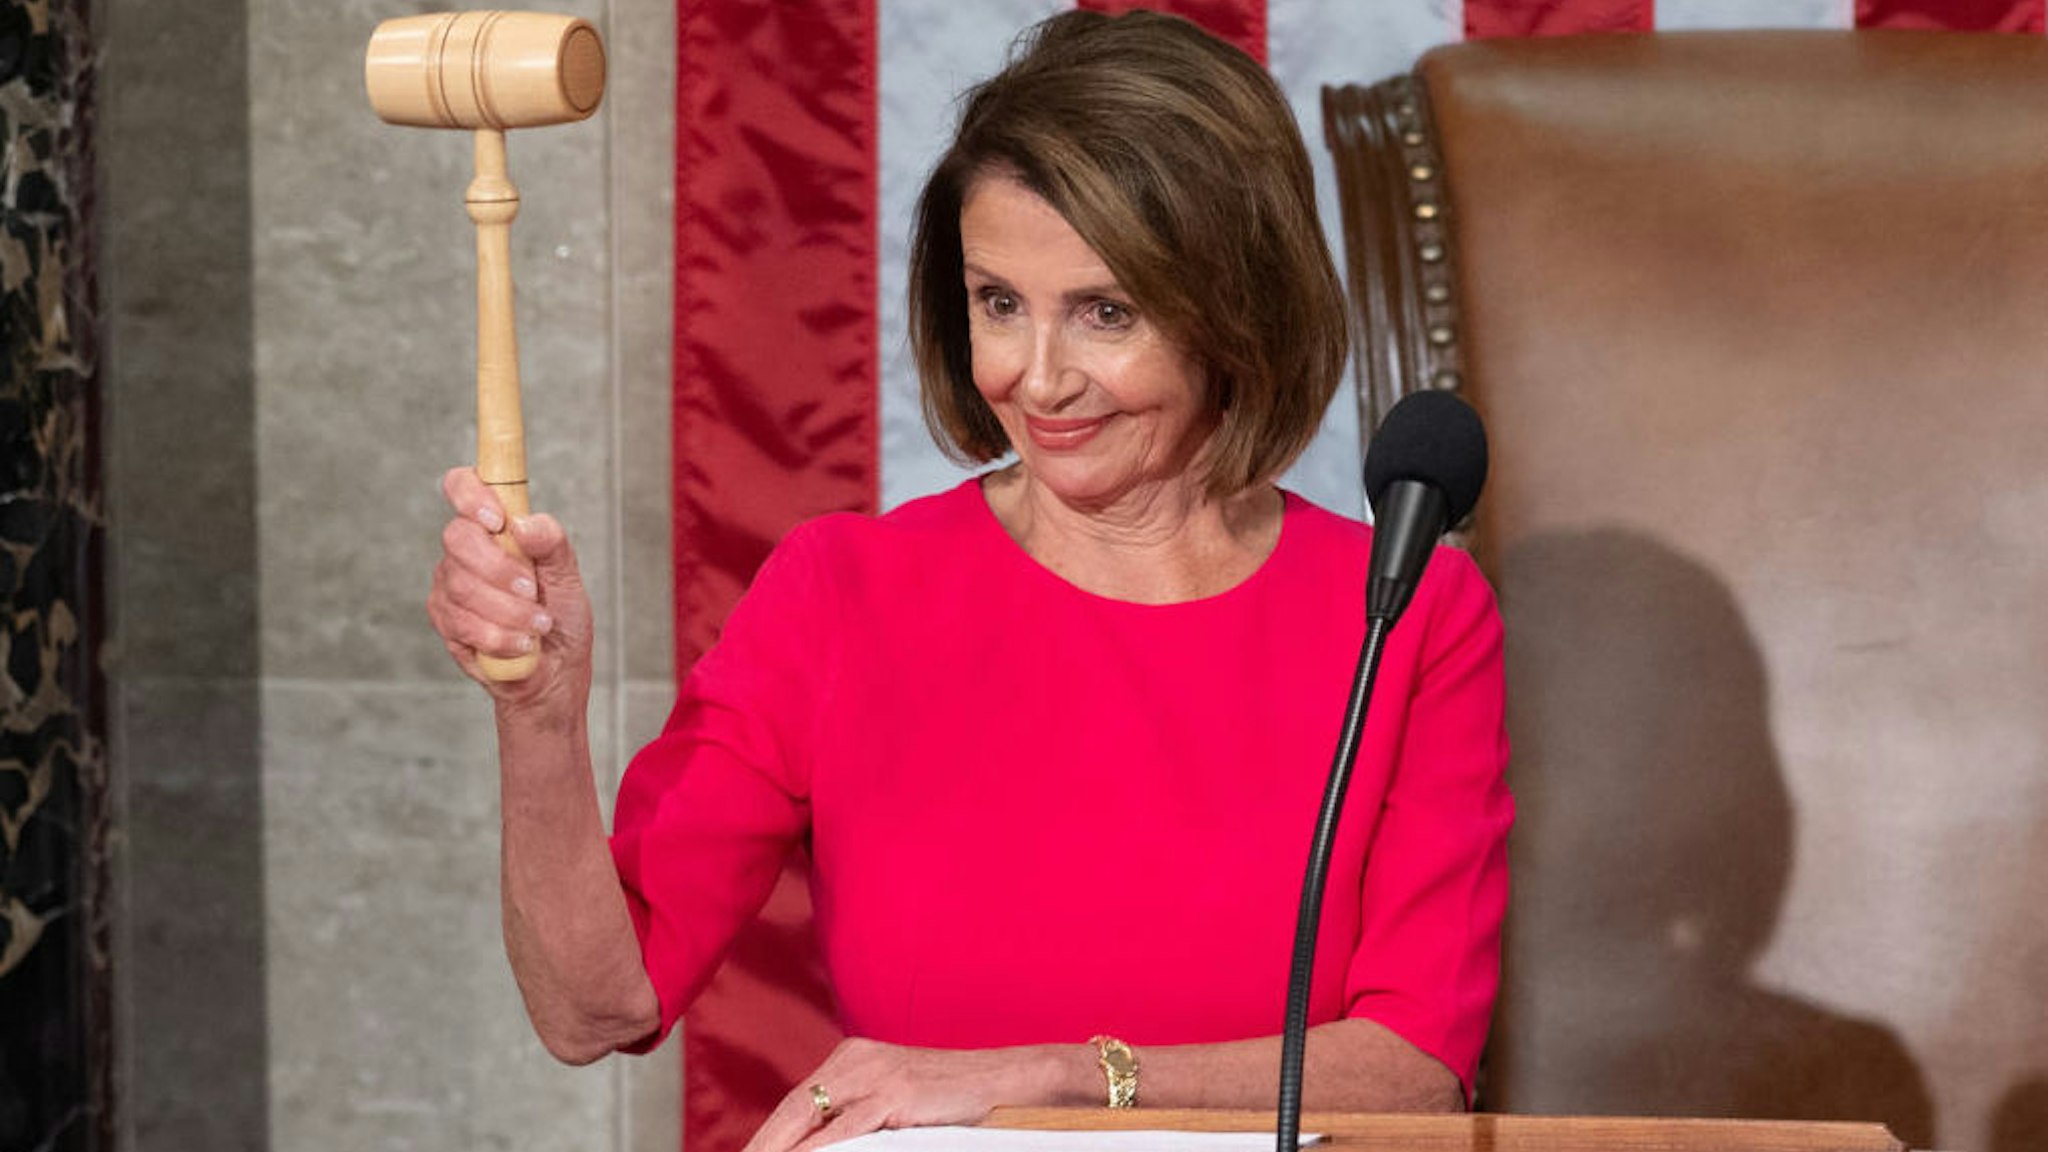 Incoming Speaker of the House Nancy Pelosi holds her gavel after being elected during the beginning of the 116th US Congress at the US Capitol in Washington, DC, January 3, 2019. - Pelosi was elected speaker of the House Thursday for the second time in her political career, a striking comeback for the only woman ever to hold the post. (Photo by SAUL LOEB / AFP)